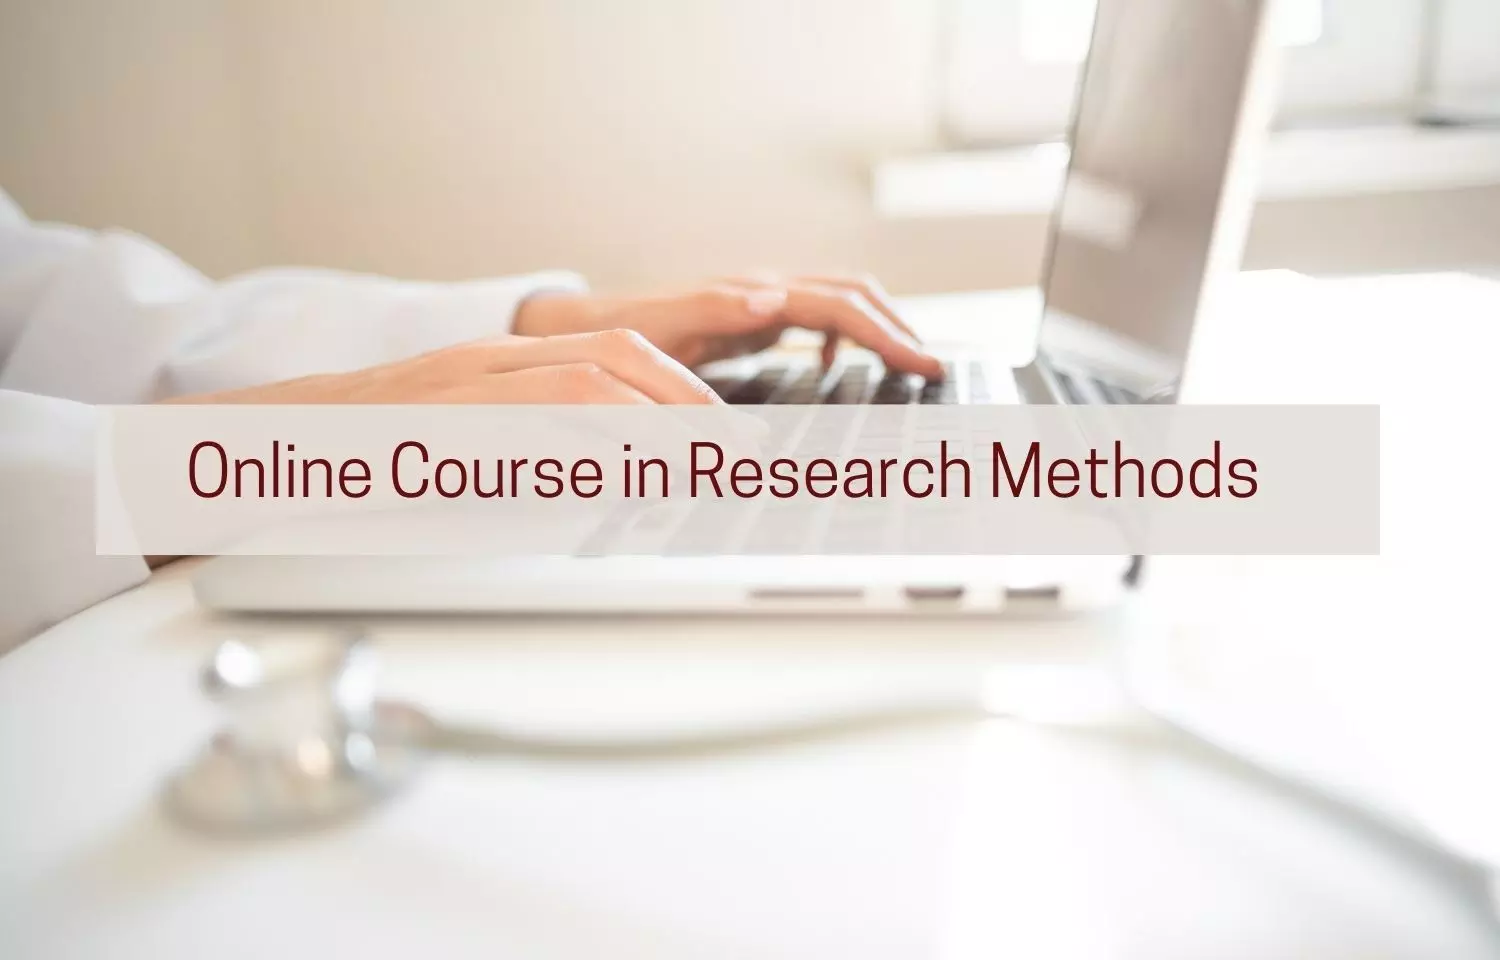 NMC exempts PG medicos on completion of Online Course in Research Methods, but imposes rider